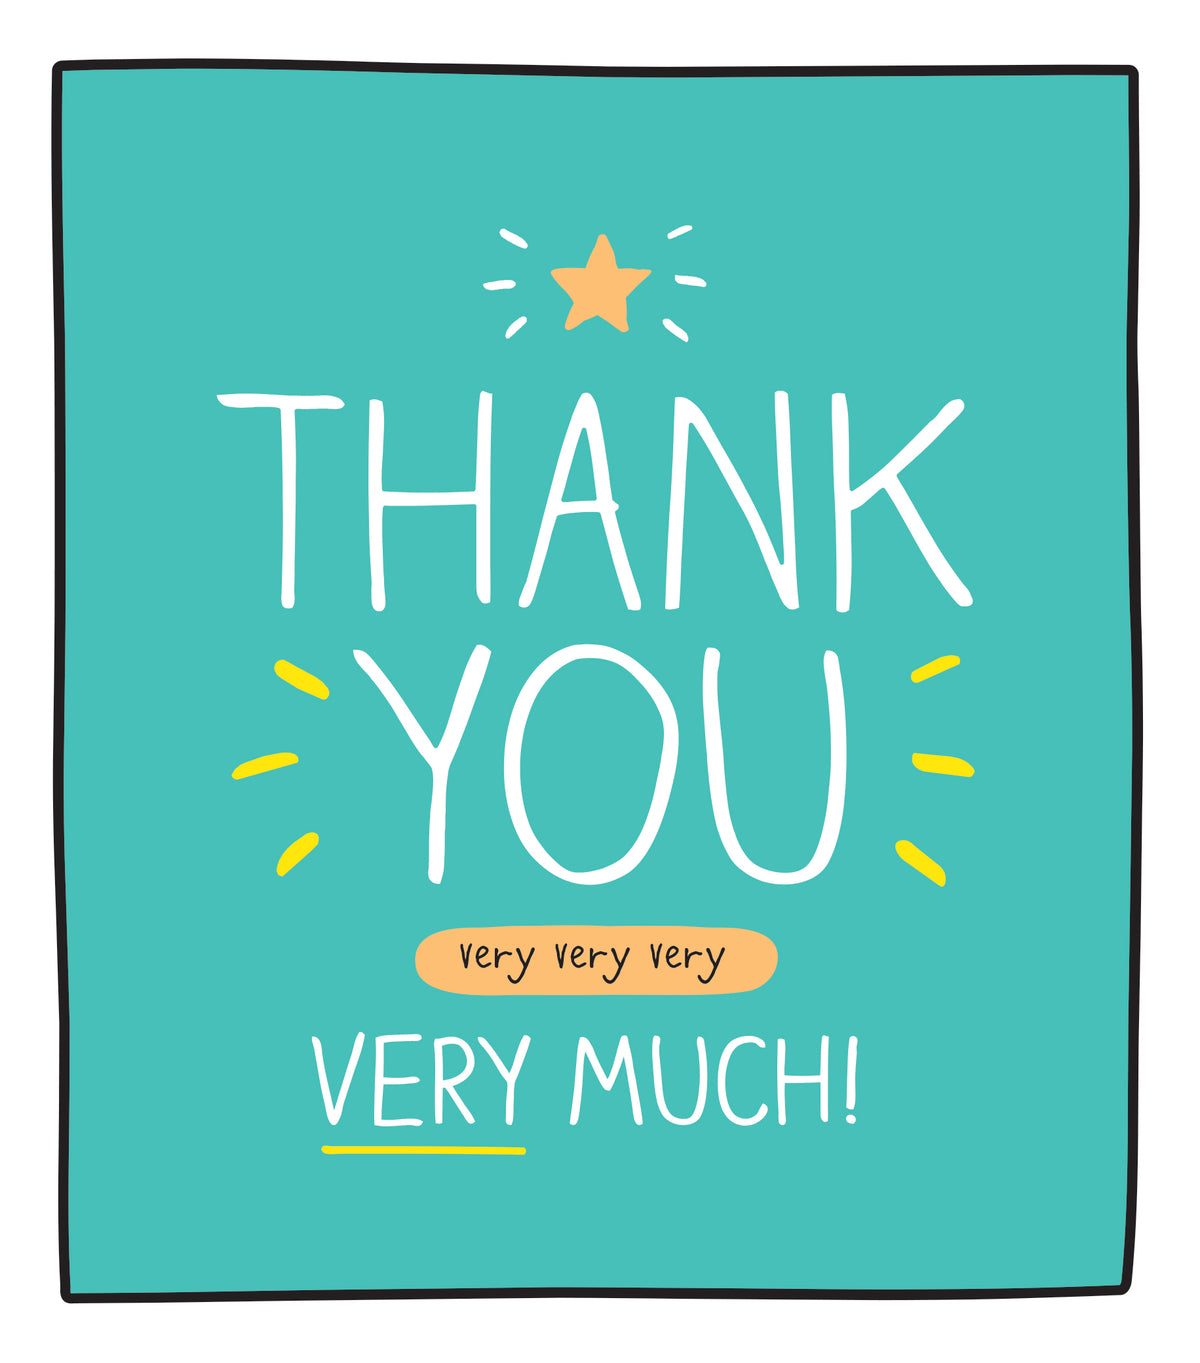 A greetings card with a turquoise background and white border. The words in the centre of the card say THANK YOU very very very VERY MUCH in a mix of capitals and script. Thank You are the largest words in the centre. There is a small star above the words too.